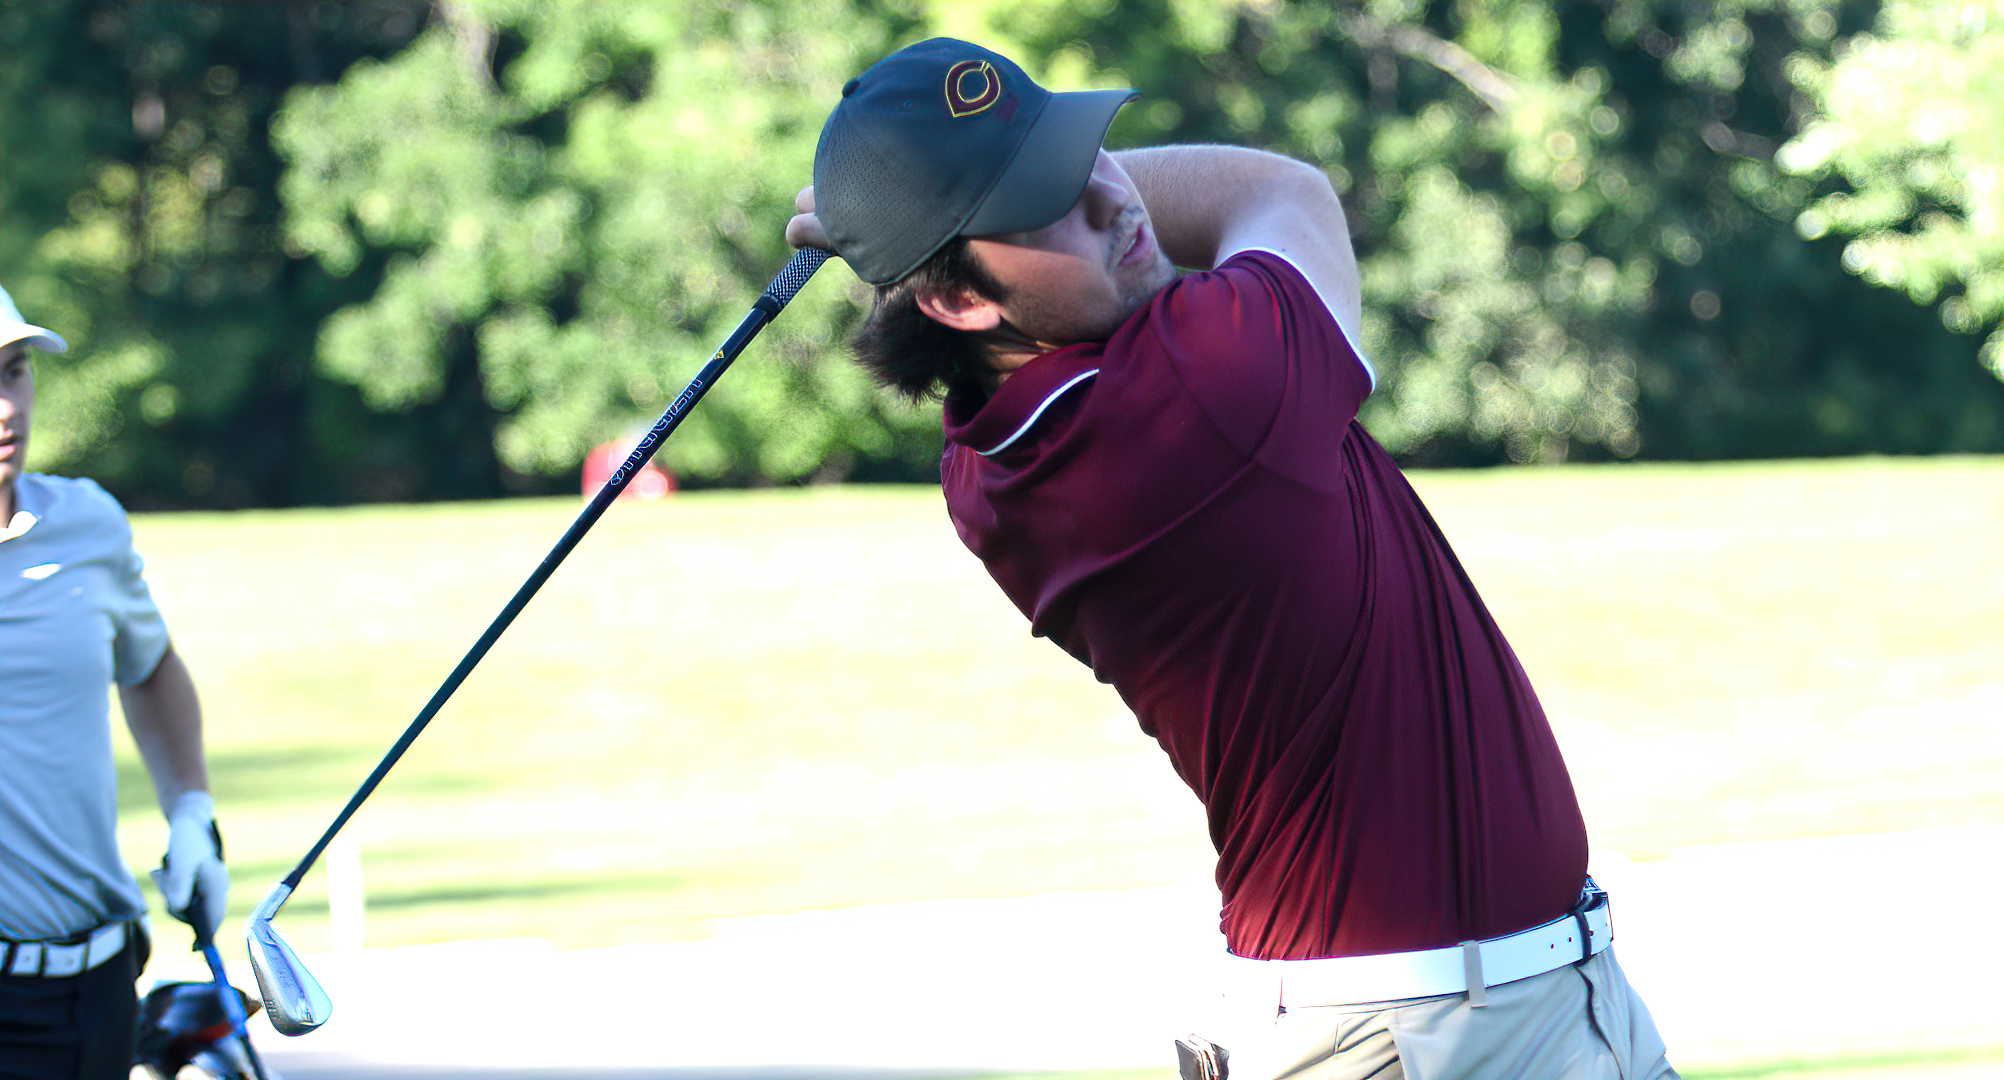 Ryan Jenson led Concordia in their spring opener at the Bobby Krig Invite. He finished with a 2-day total of 157 and helped CC place 12th as a team.